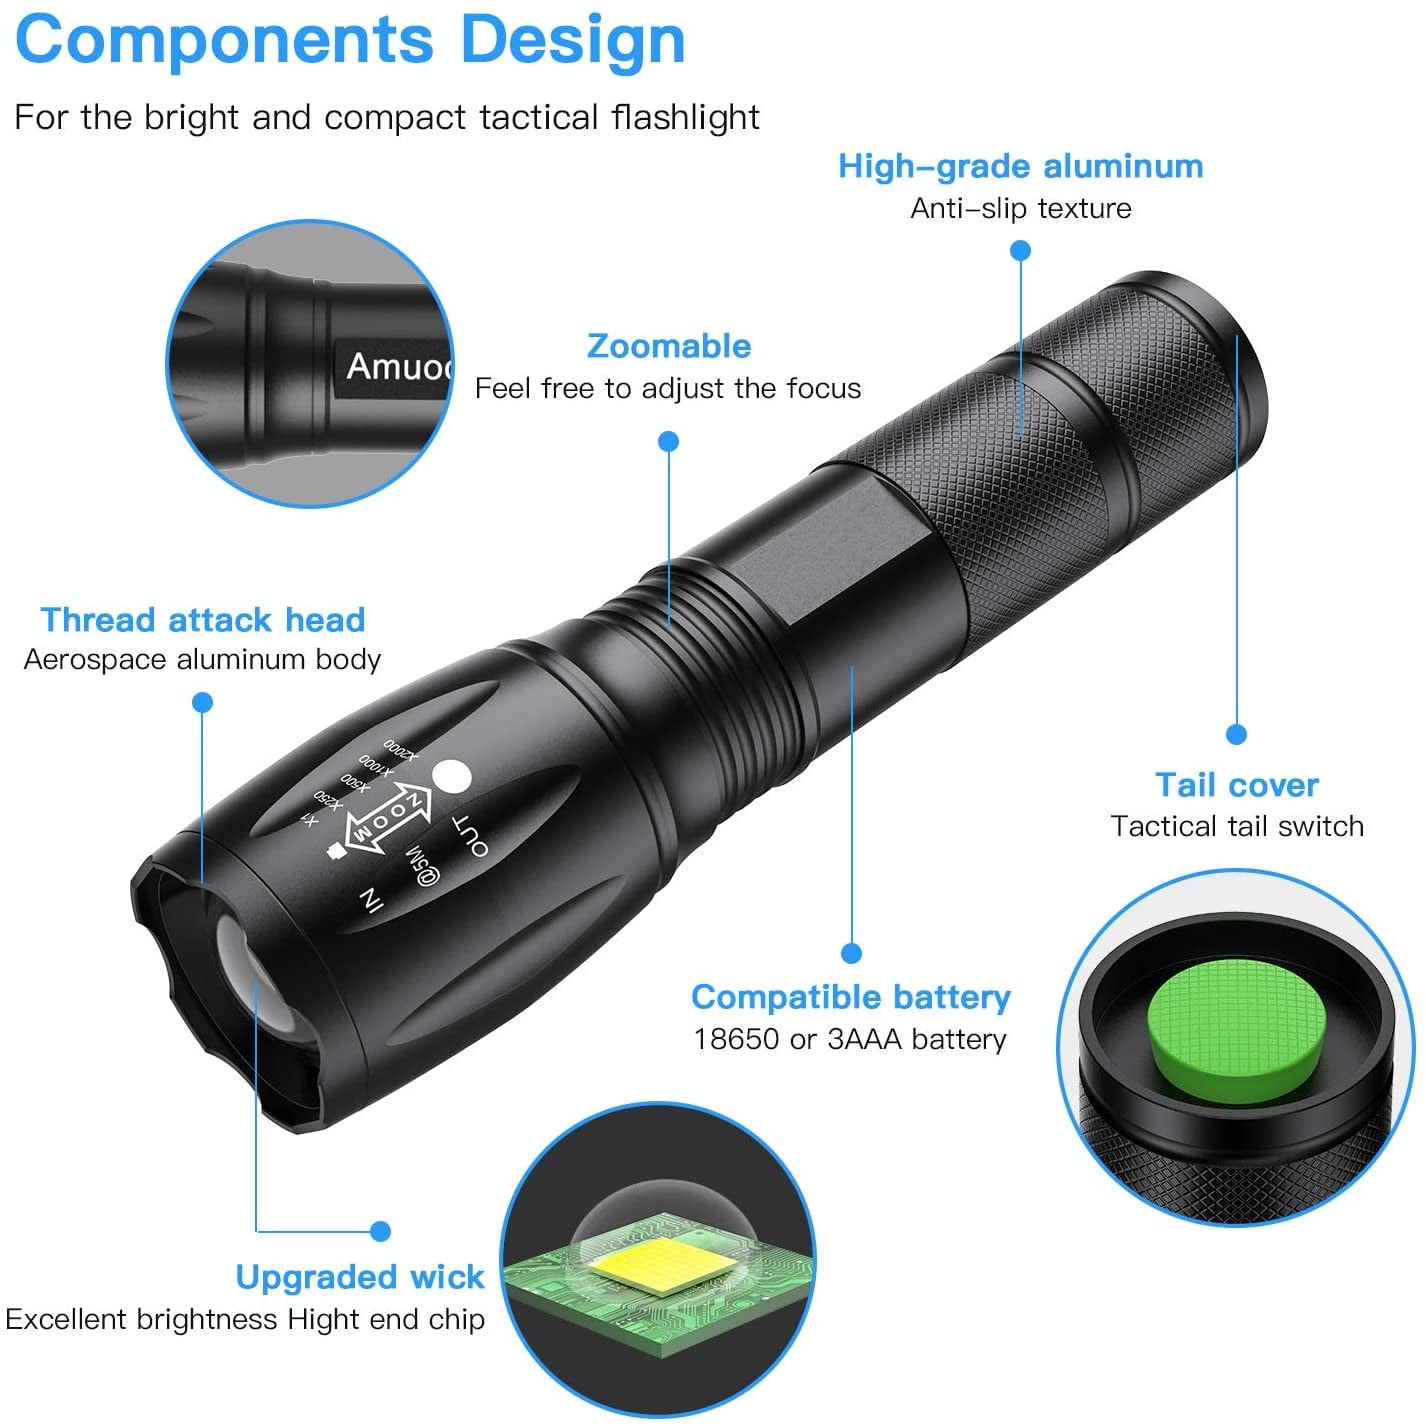 KEHOLL LED Flashlight, 800 Lumens Rechargeable Tactical Bright Flashlights  with 3 Modes, Waterproof EDC Flash Light for Outdoor Activities, Rescue